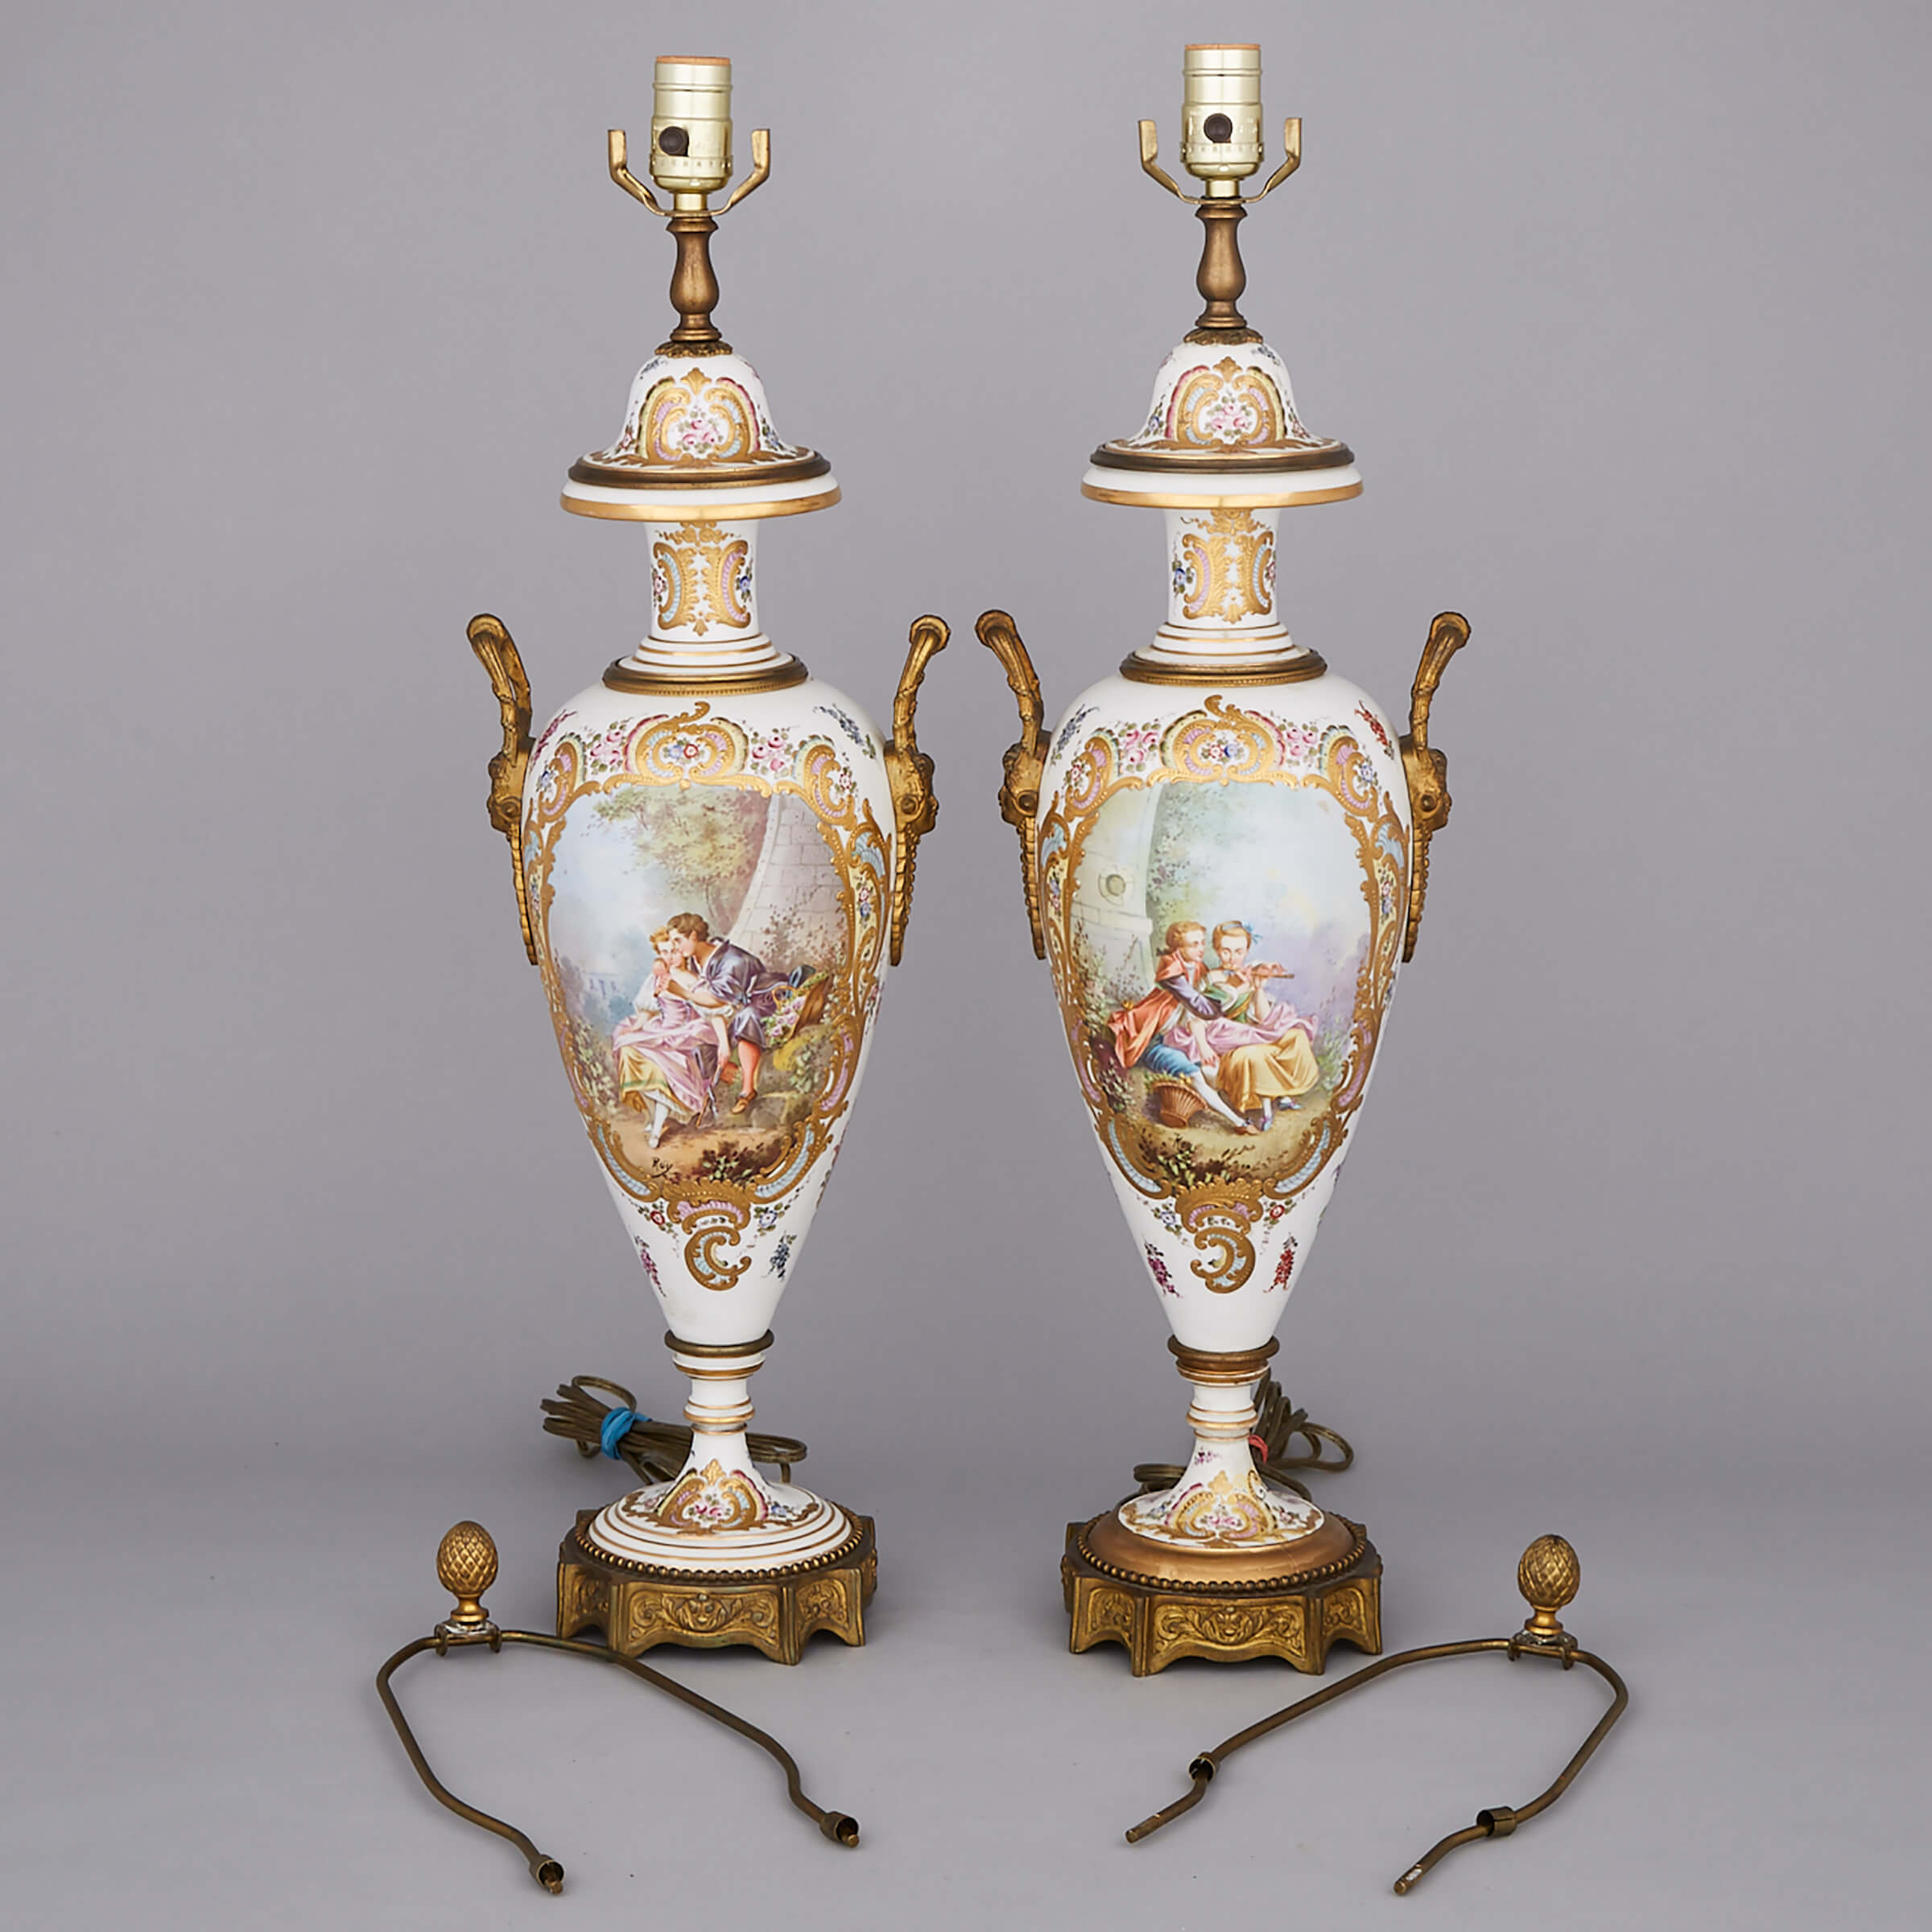 Pair of Ormolu Mounted ‘Sèvres’ Table Lamps, early 20th century